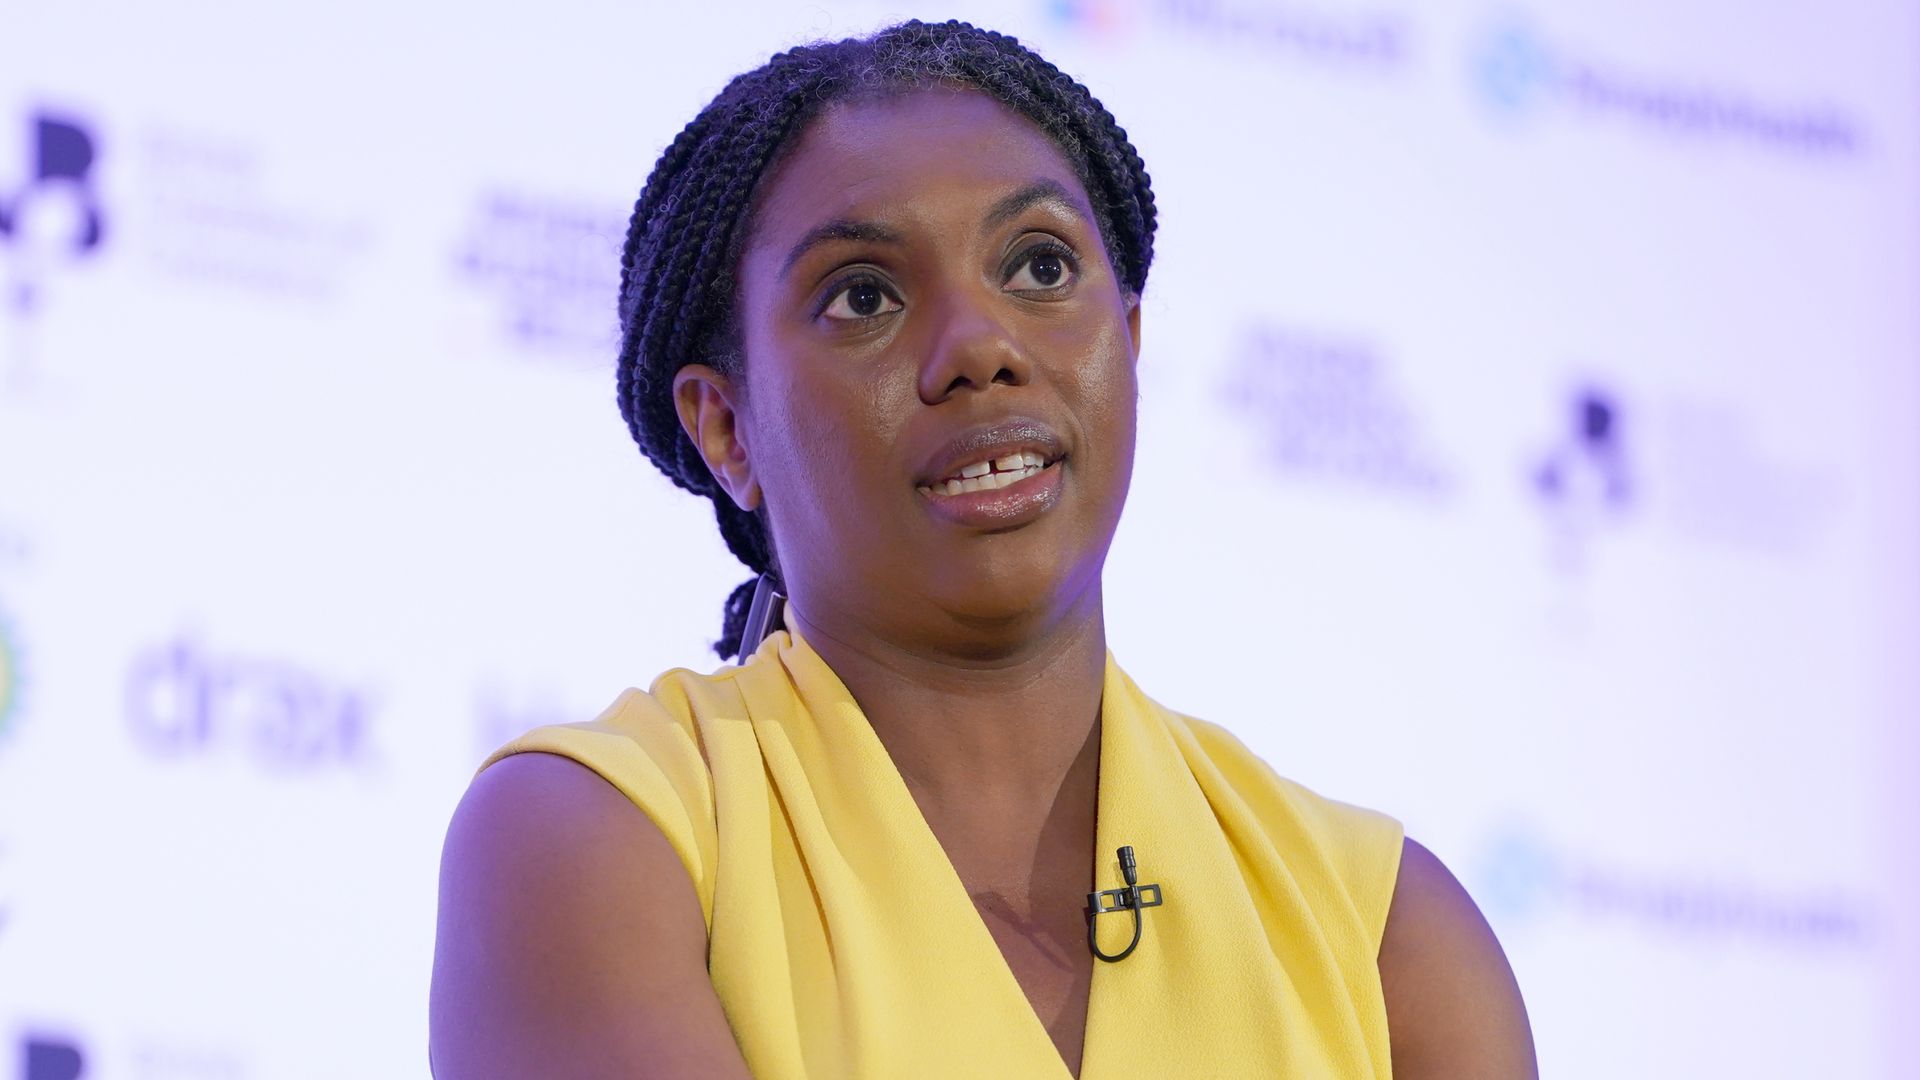 Kemi Badenoch rejects bullying accusations as 'utterly false smears'